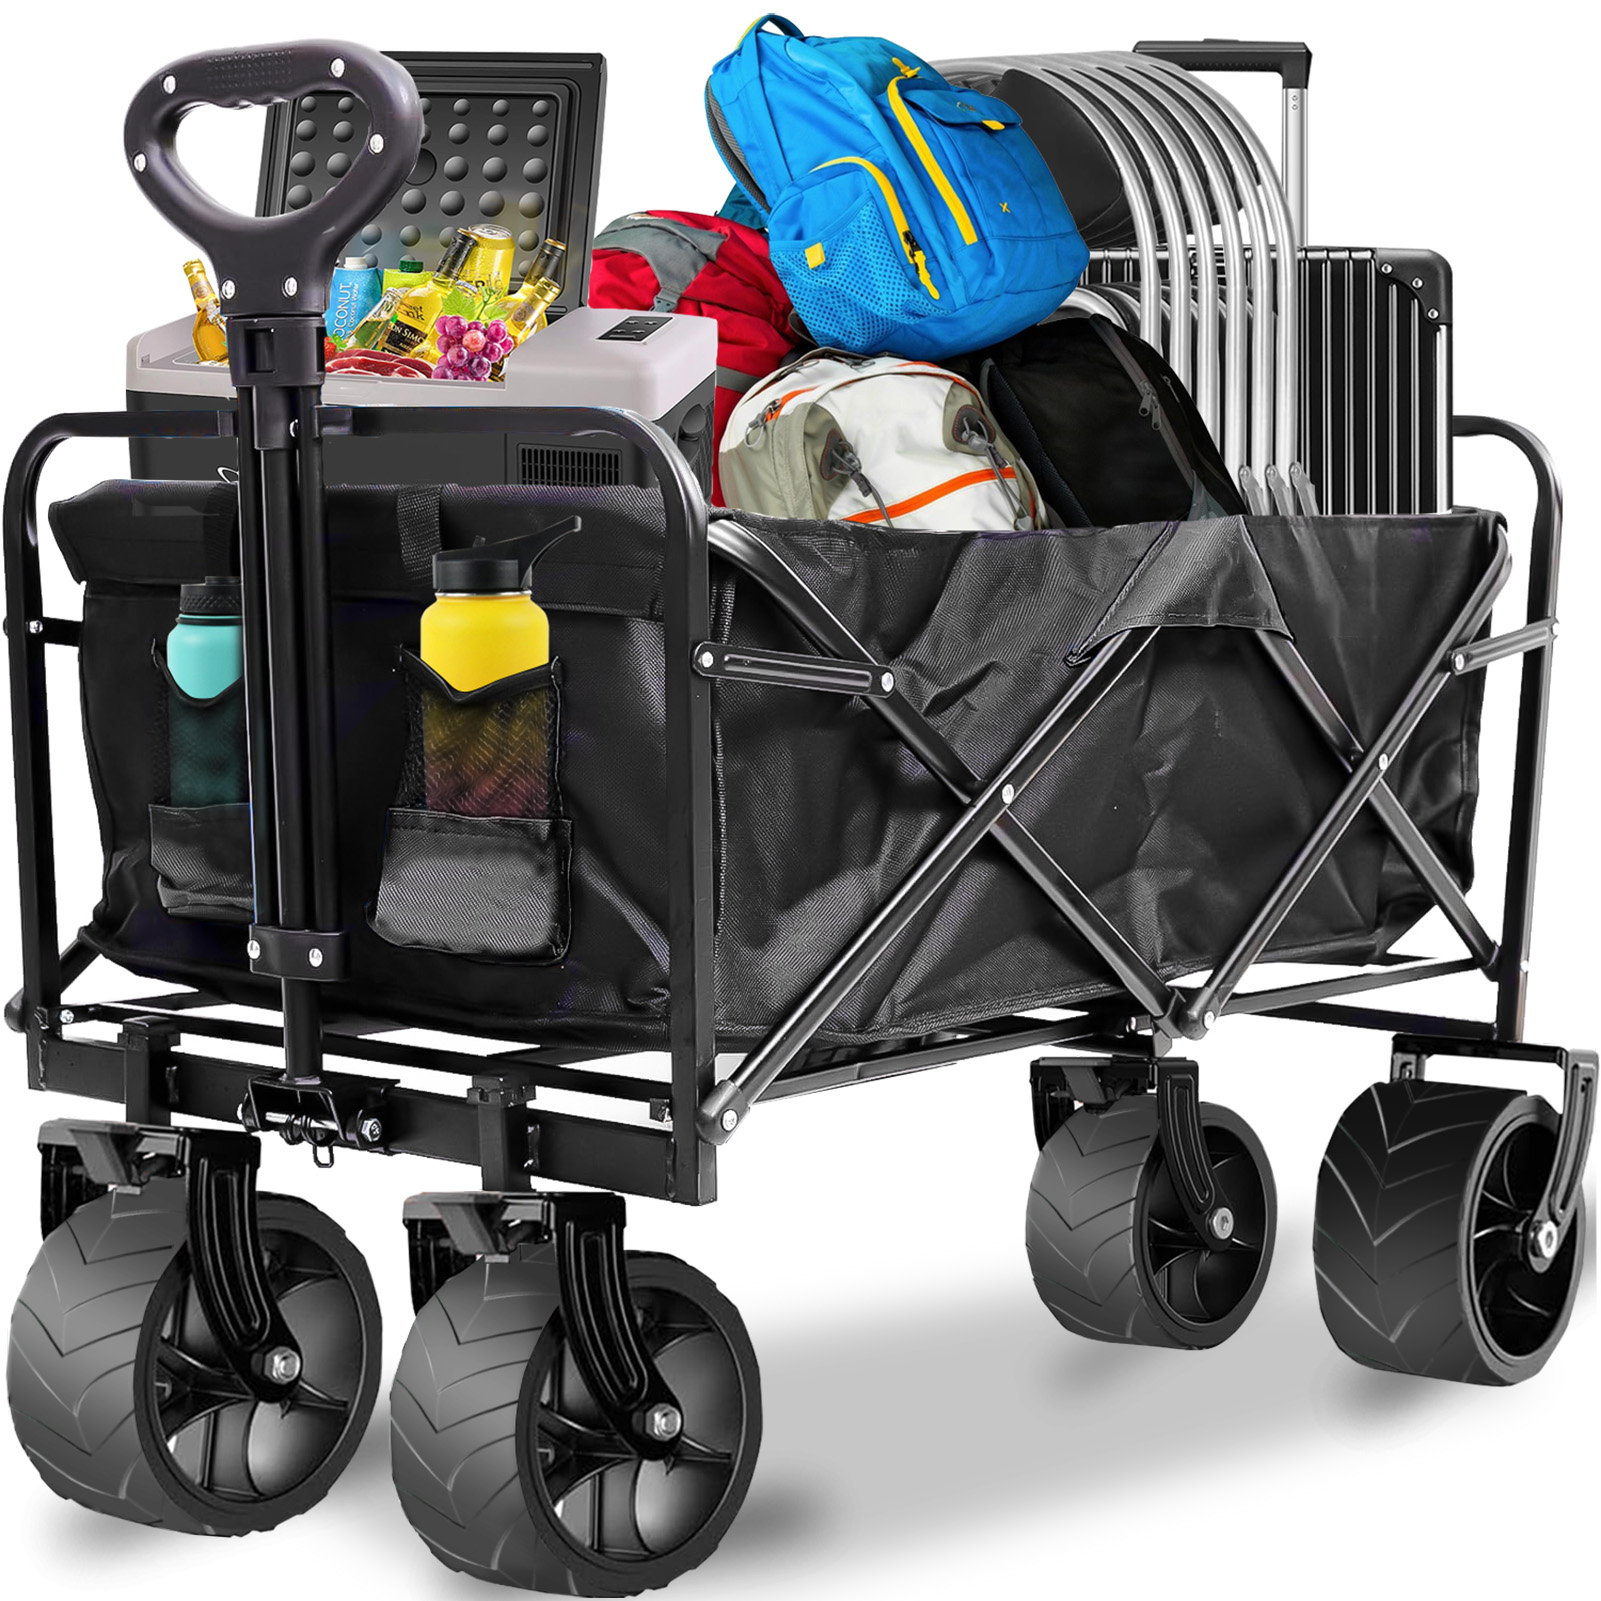 

Collapsible Folding Wagon Cart, 120l Heavy Duty Utility Cart With 350lbs Capacity - Ideal For Grocery, Shopping, Camping, And Beach Trips - All Terrain Wheels,